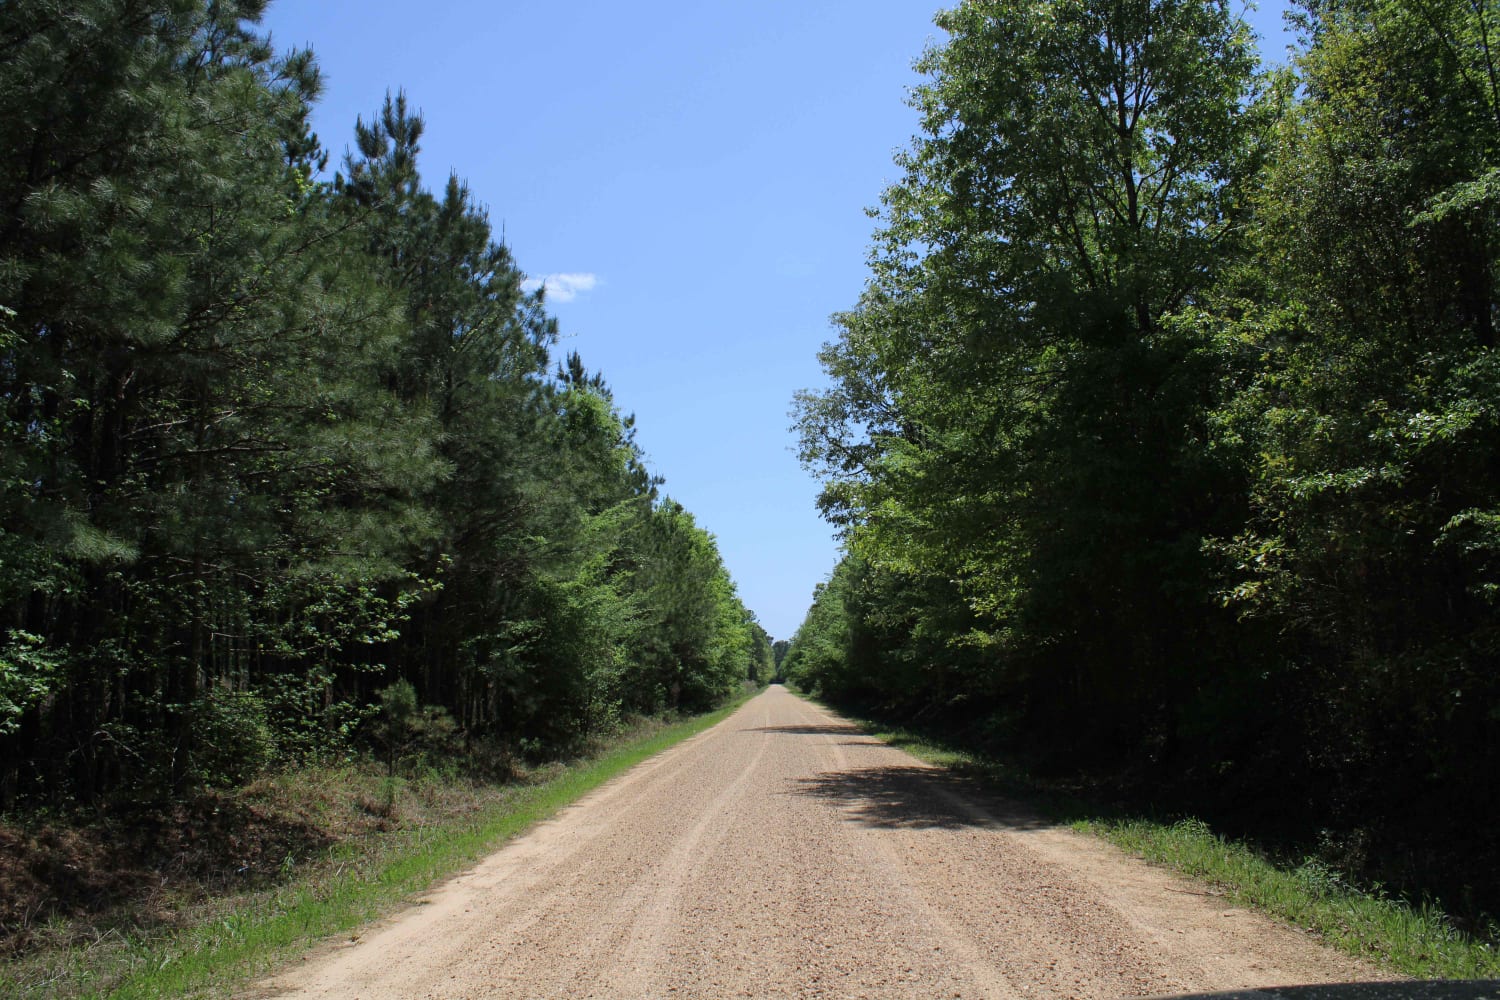 The Arkansas Overland Route - TrailHawk Loop - Section 19